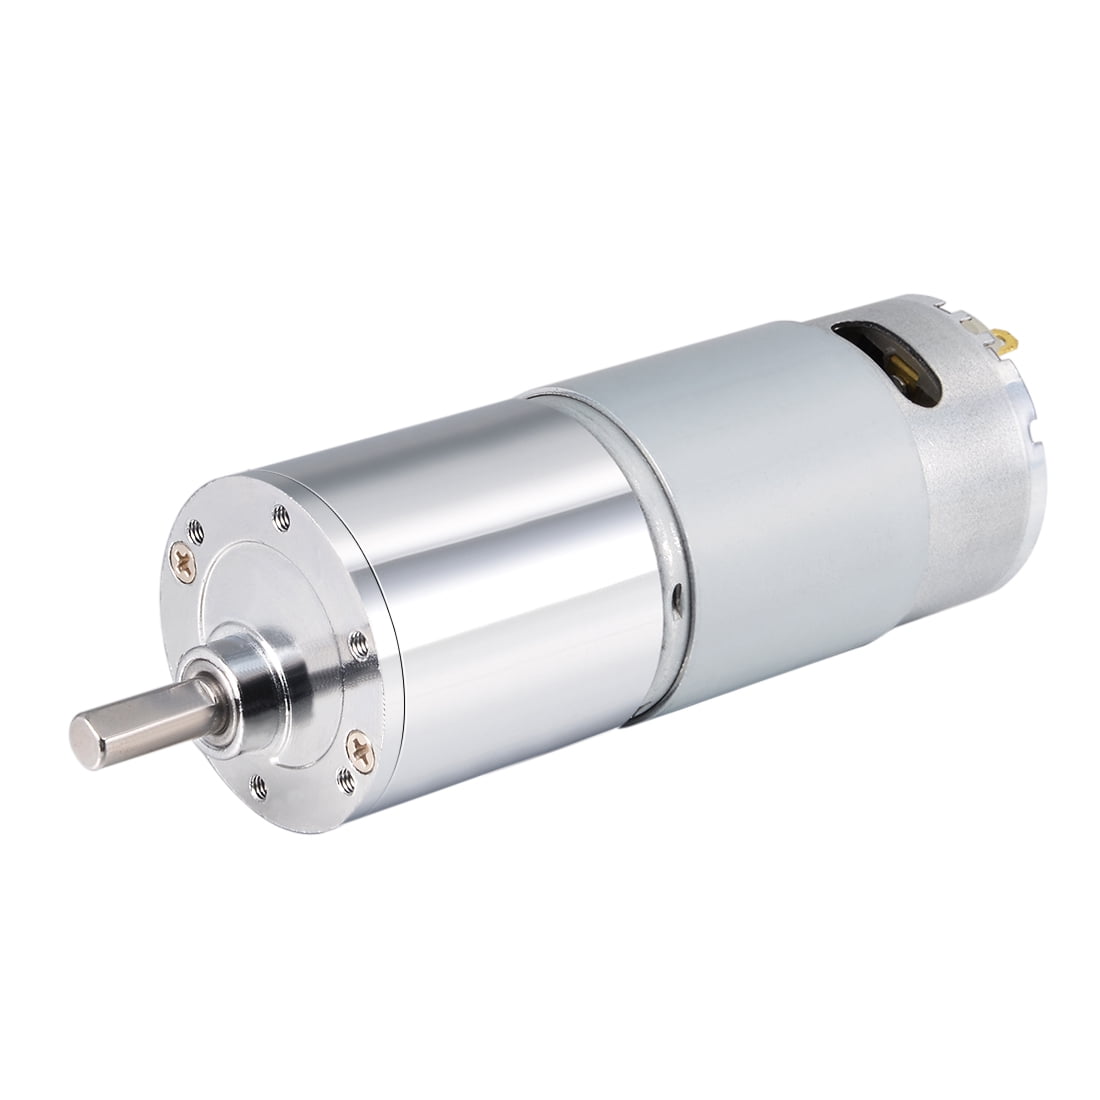 12V Brushed Motor,150W 0.32A DC Motor,Large Torque - Rated speed